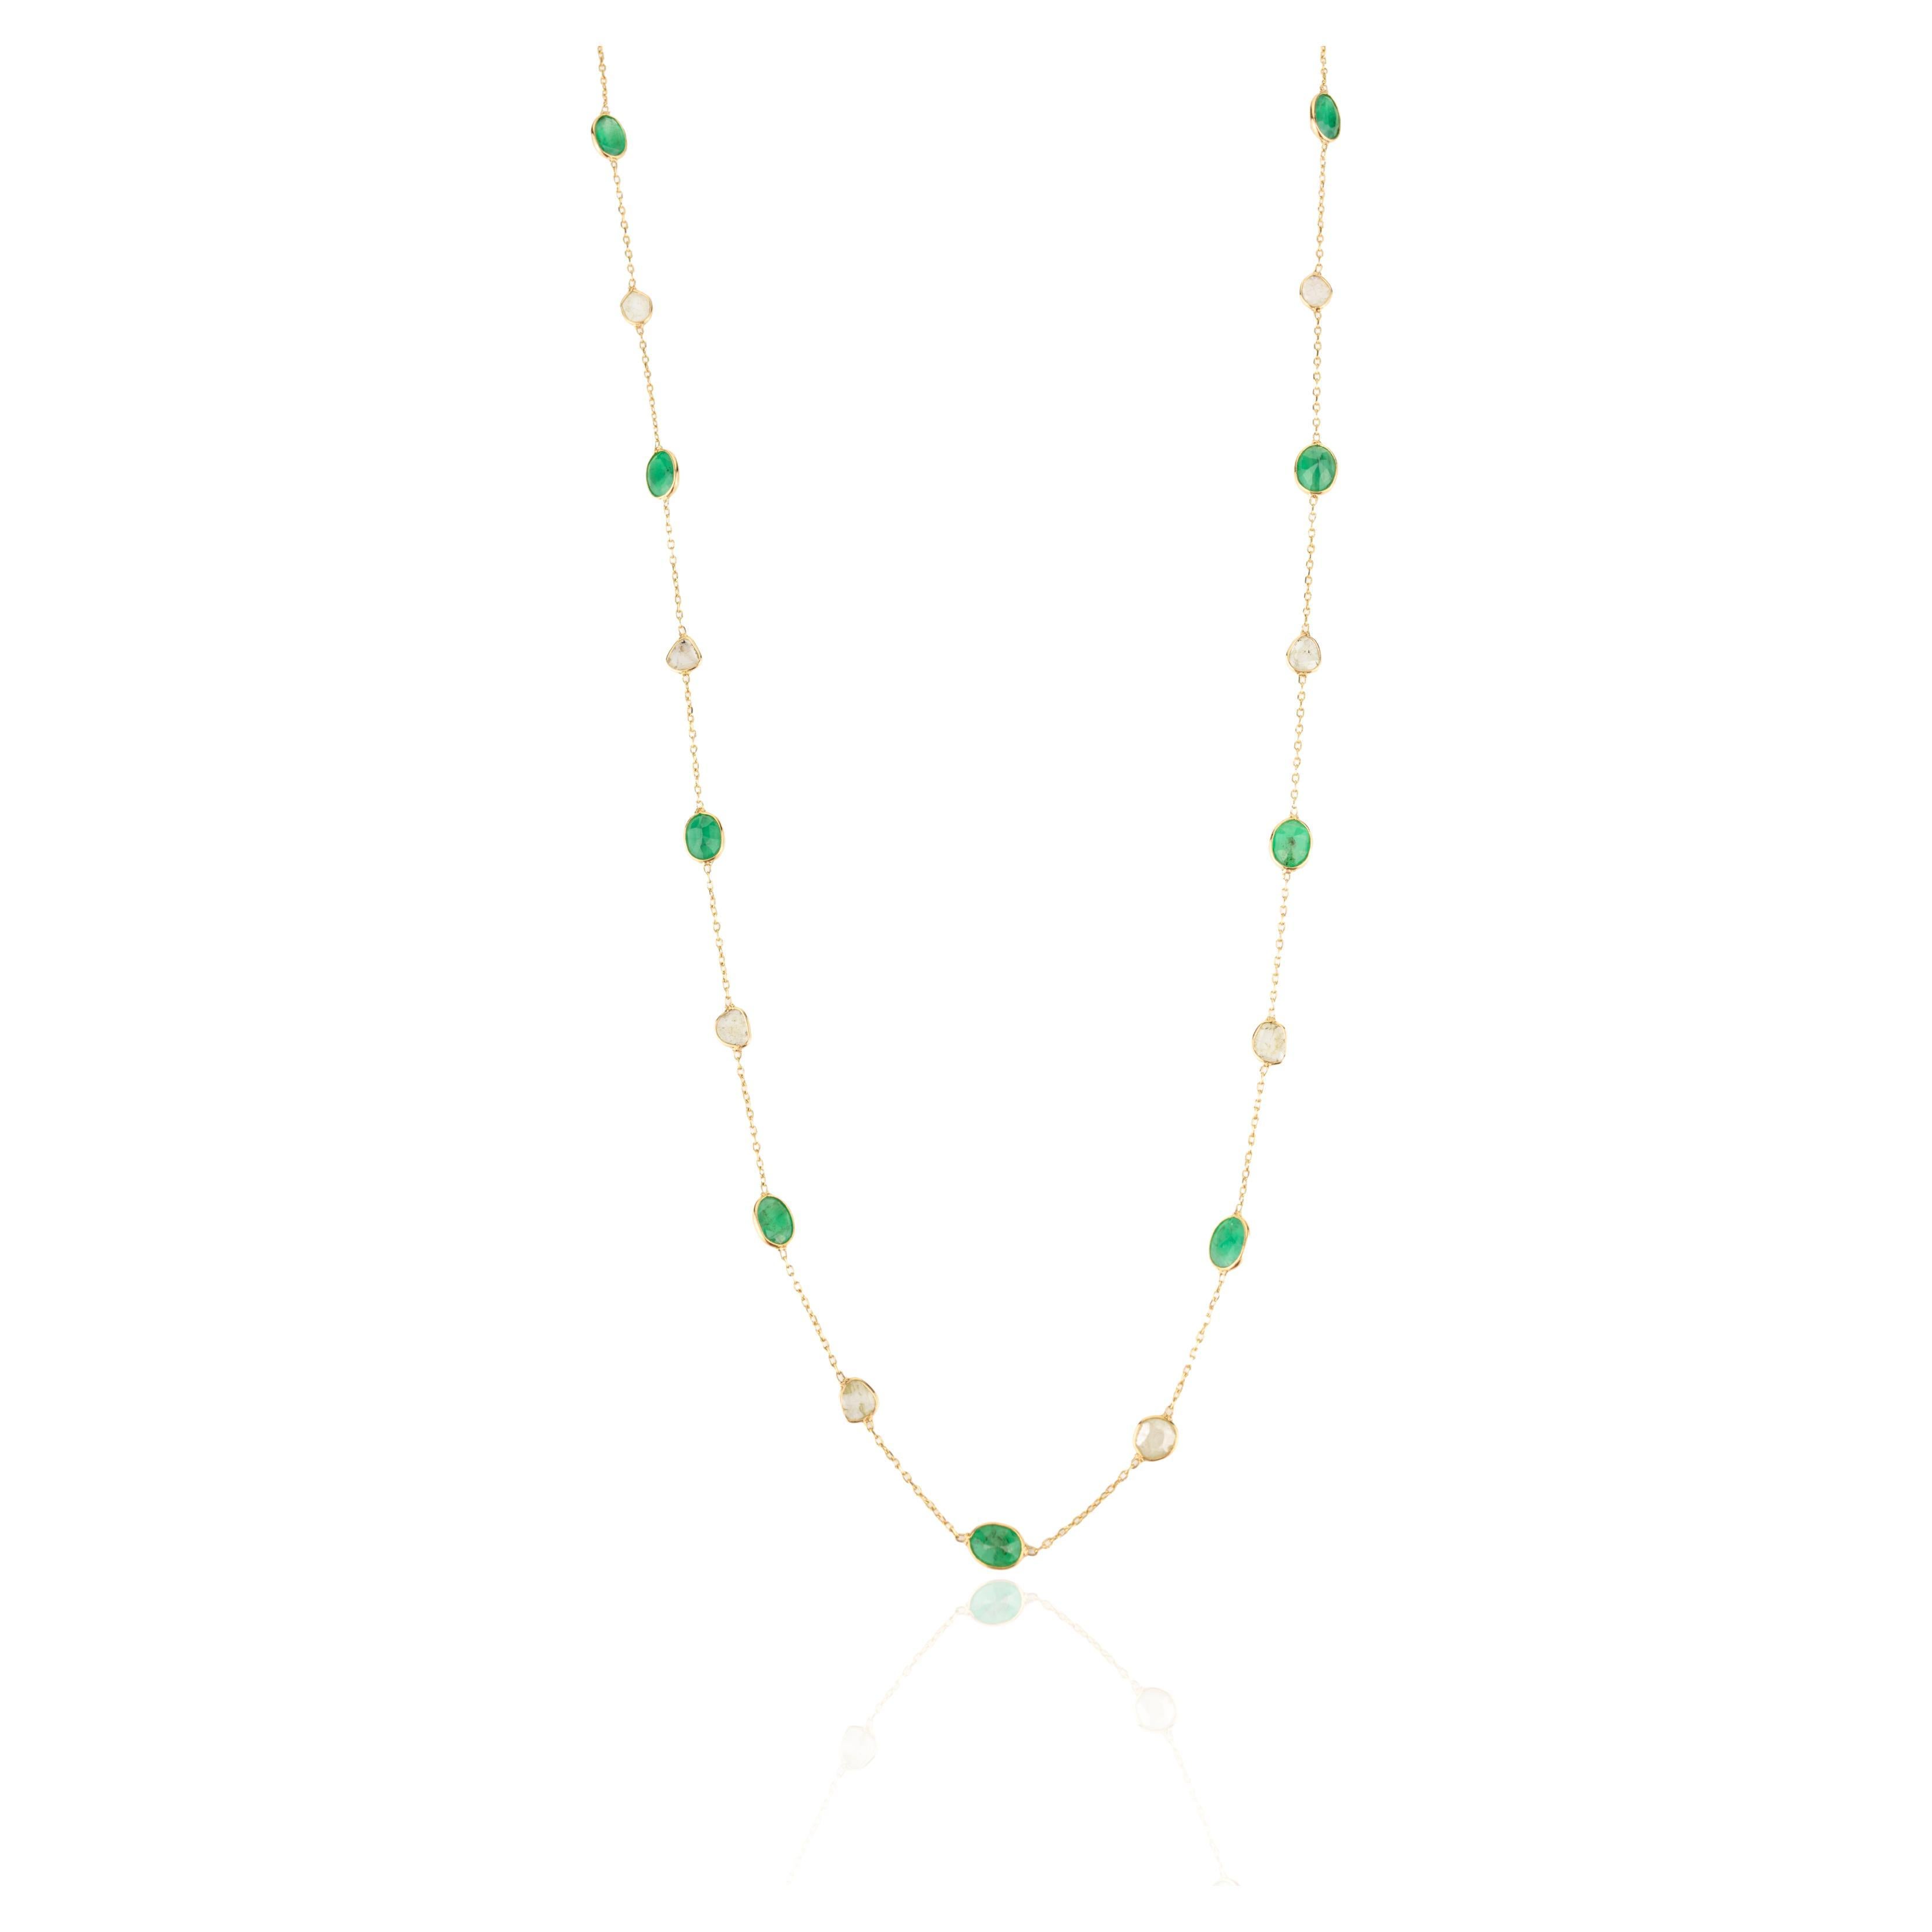 Natural Uncut Diamond and Emerald Station Necklace for Women in 18k Yellow Gold